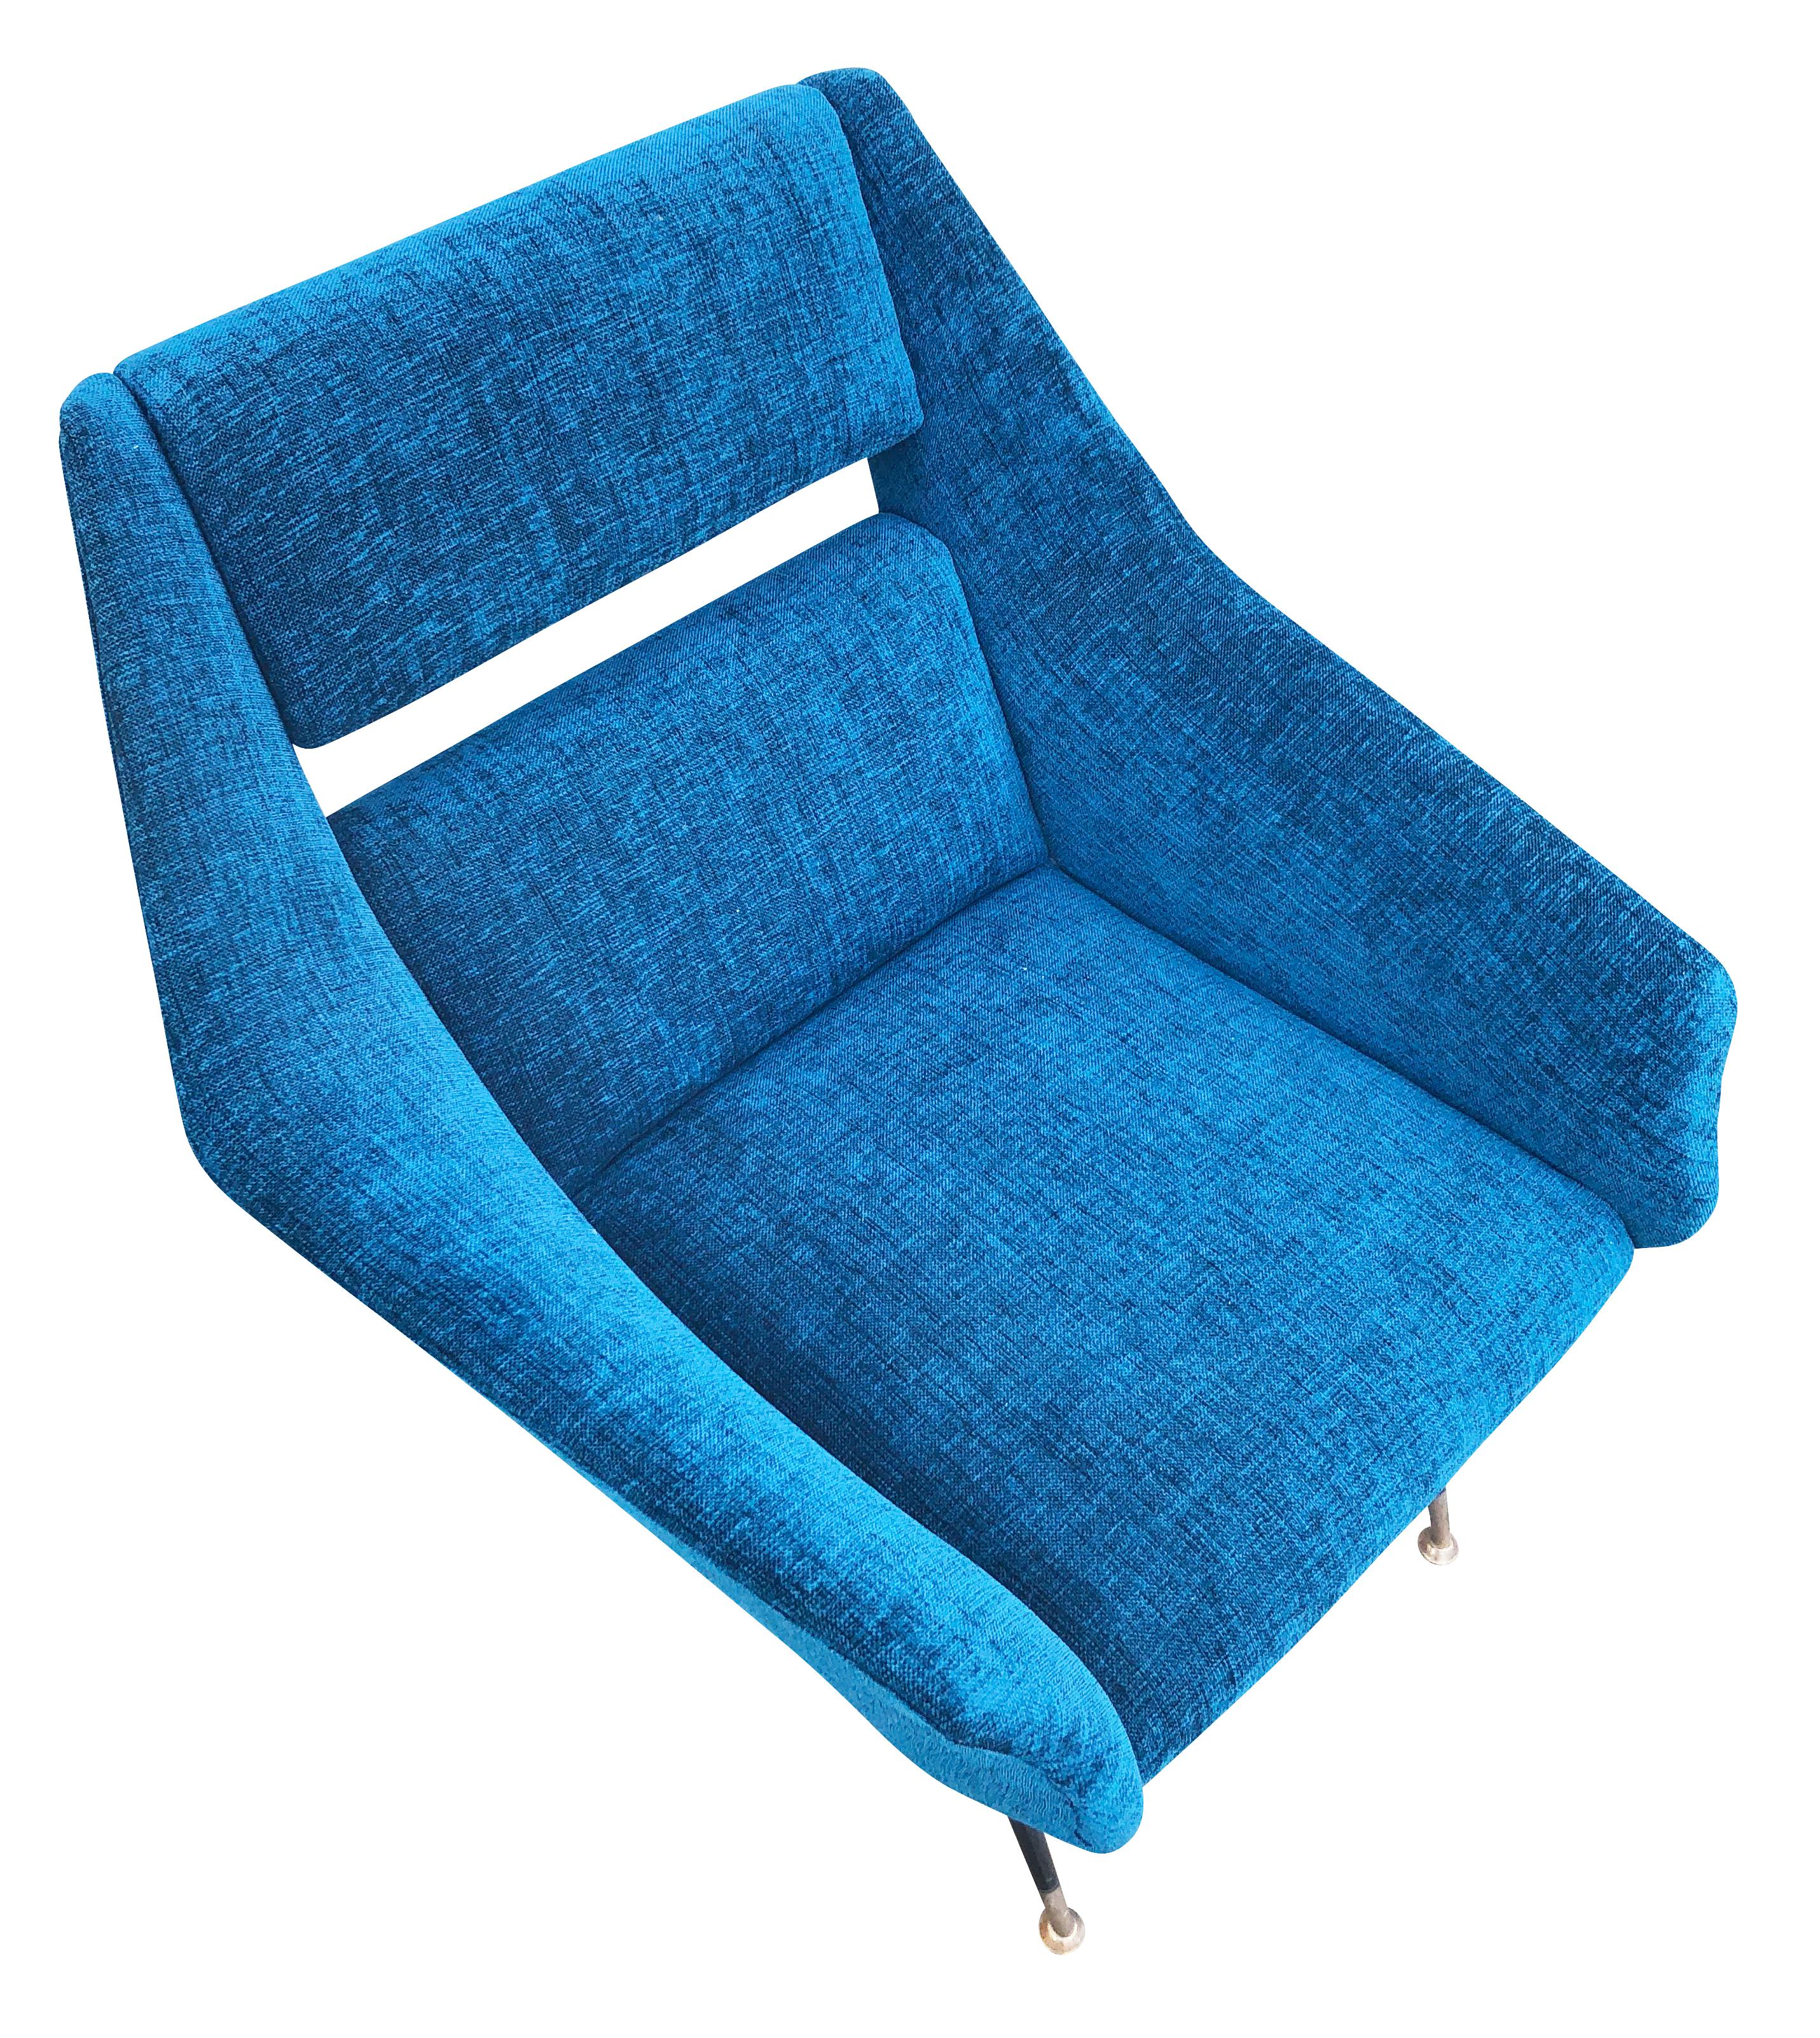 Pair of midcentury lounge chairs by Gigi Radice for Minotti. An iconic design with the very recognizable slit back and brass lags. Recovered in a blue fabric. Price listed is for the pair-Can be split upon request. 

Condition: Minor wear